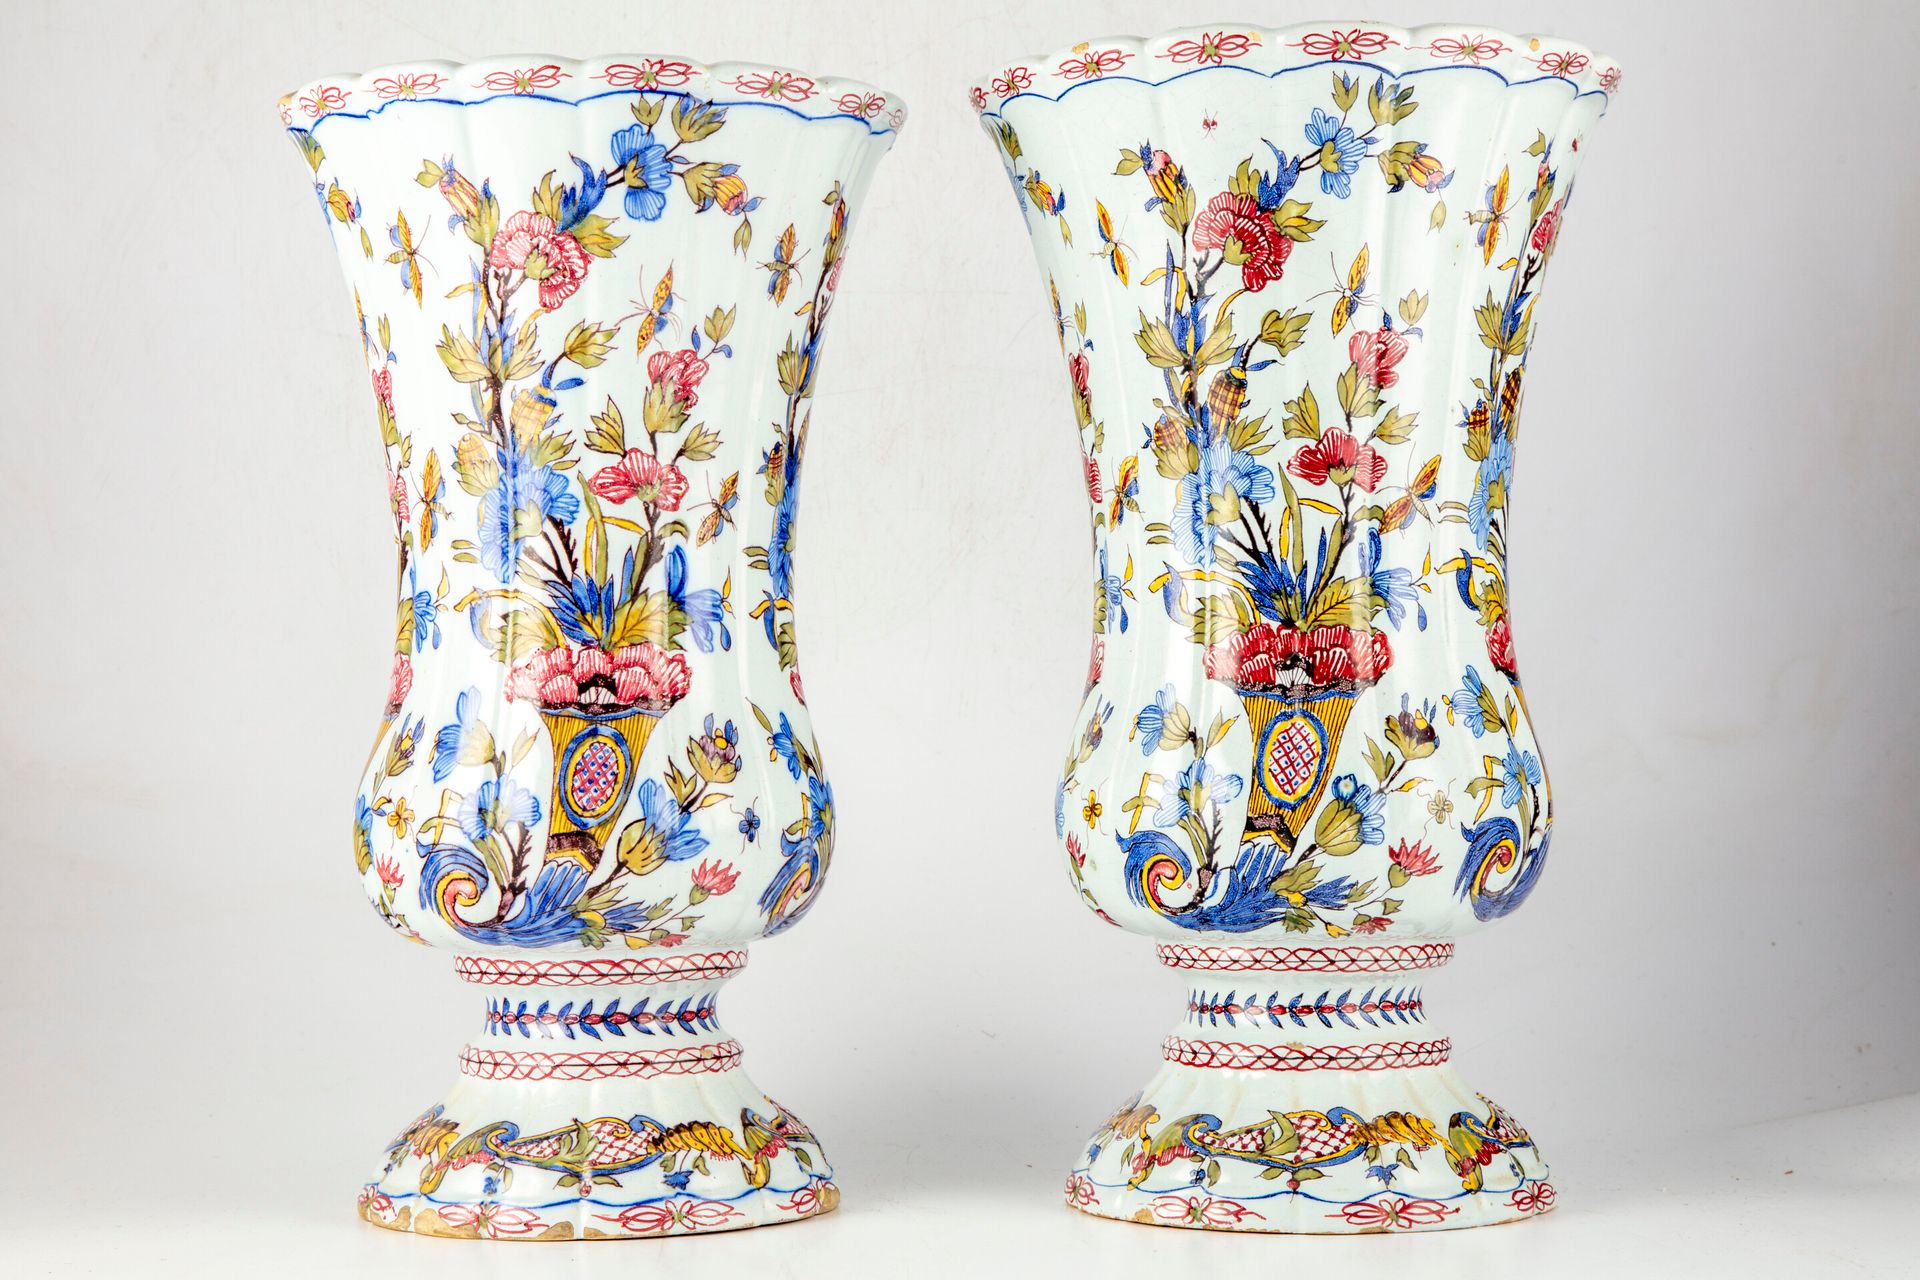 Null GIEN

Pair of important enamelled earthenware vases decorated with horns of&hellip;